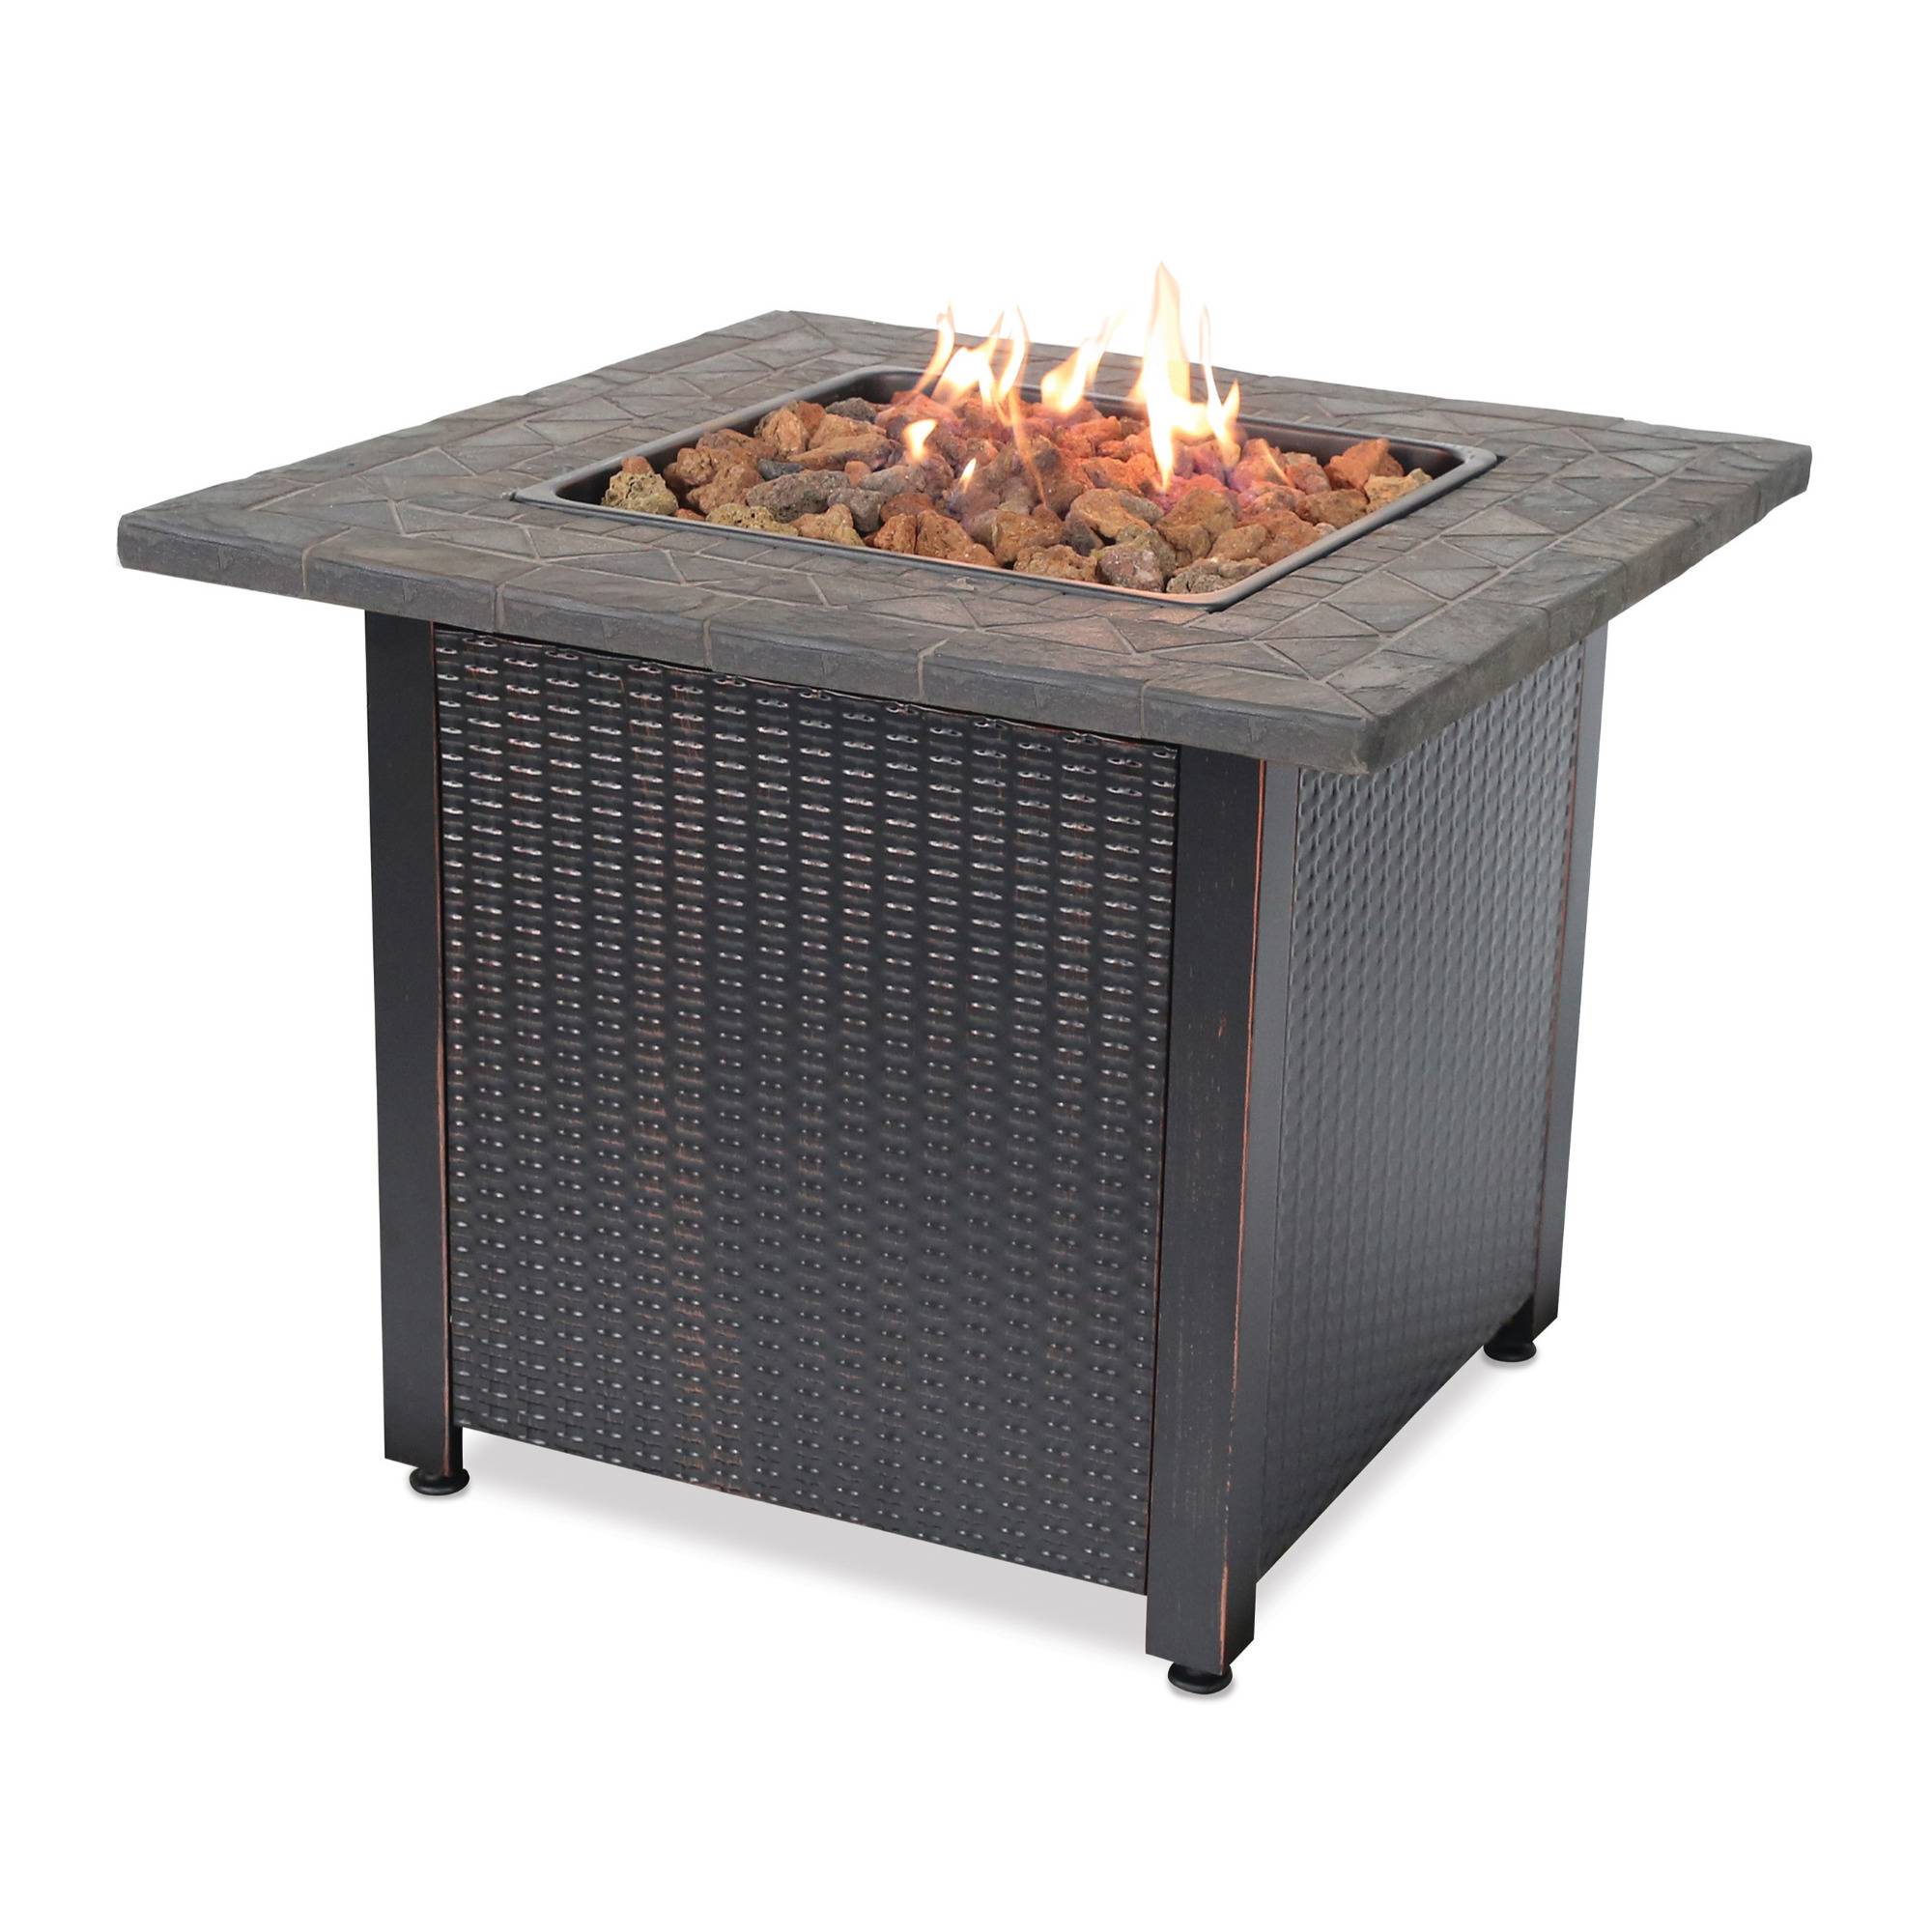 Endless Summer 30,000 BTU Outdoor Fire Pit with Resin Mantel (Uses Propane Gas)